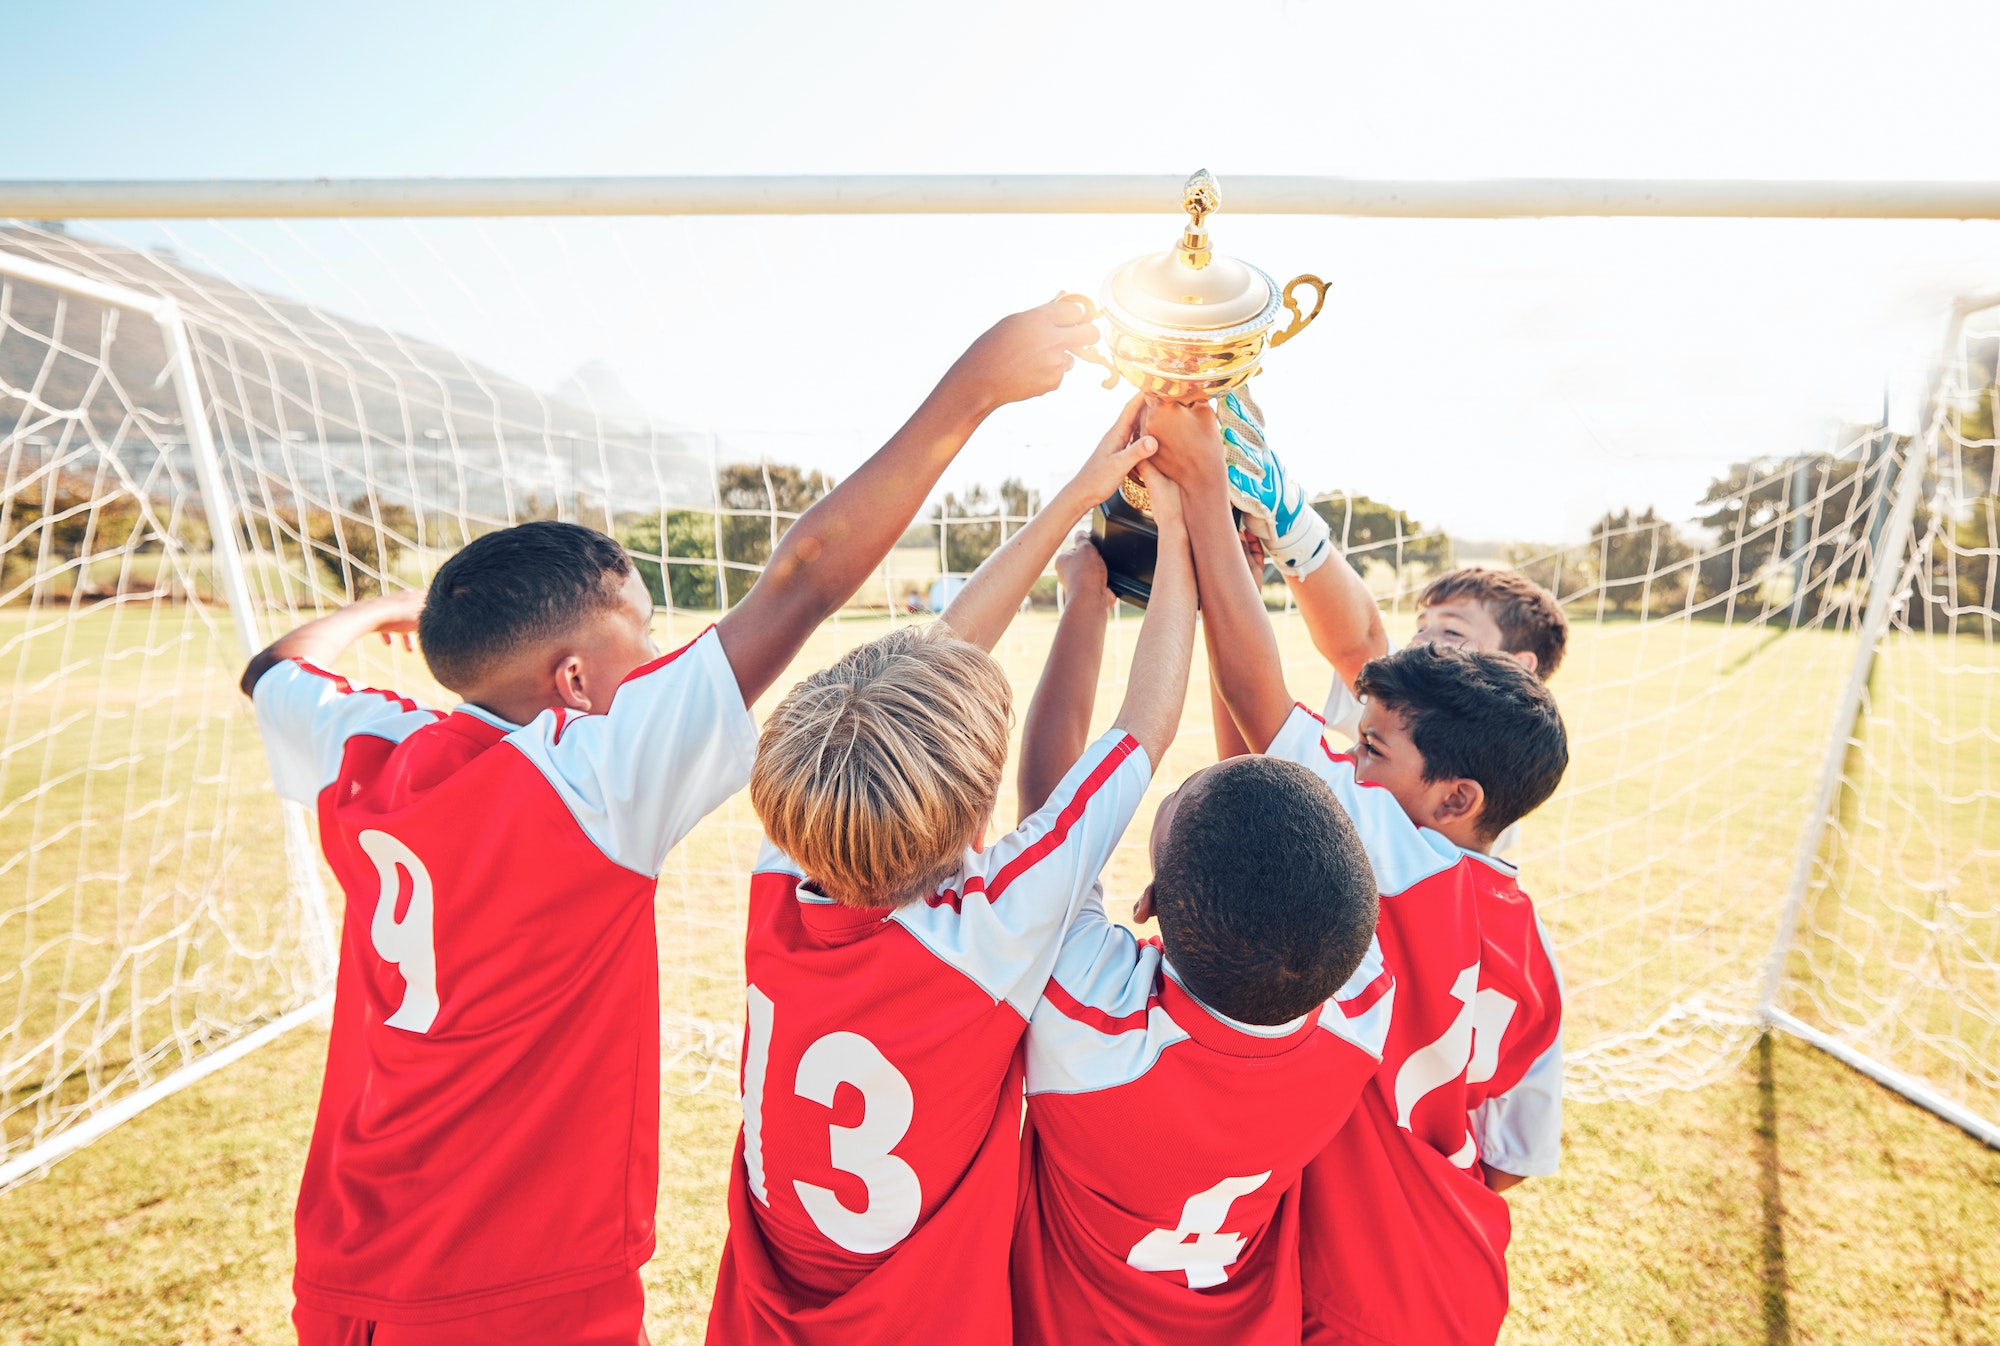 Children, winner and team soccer with trophy celebrating victory, achievement or match on the field